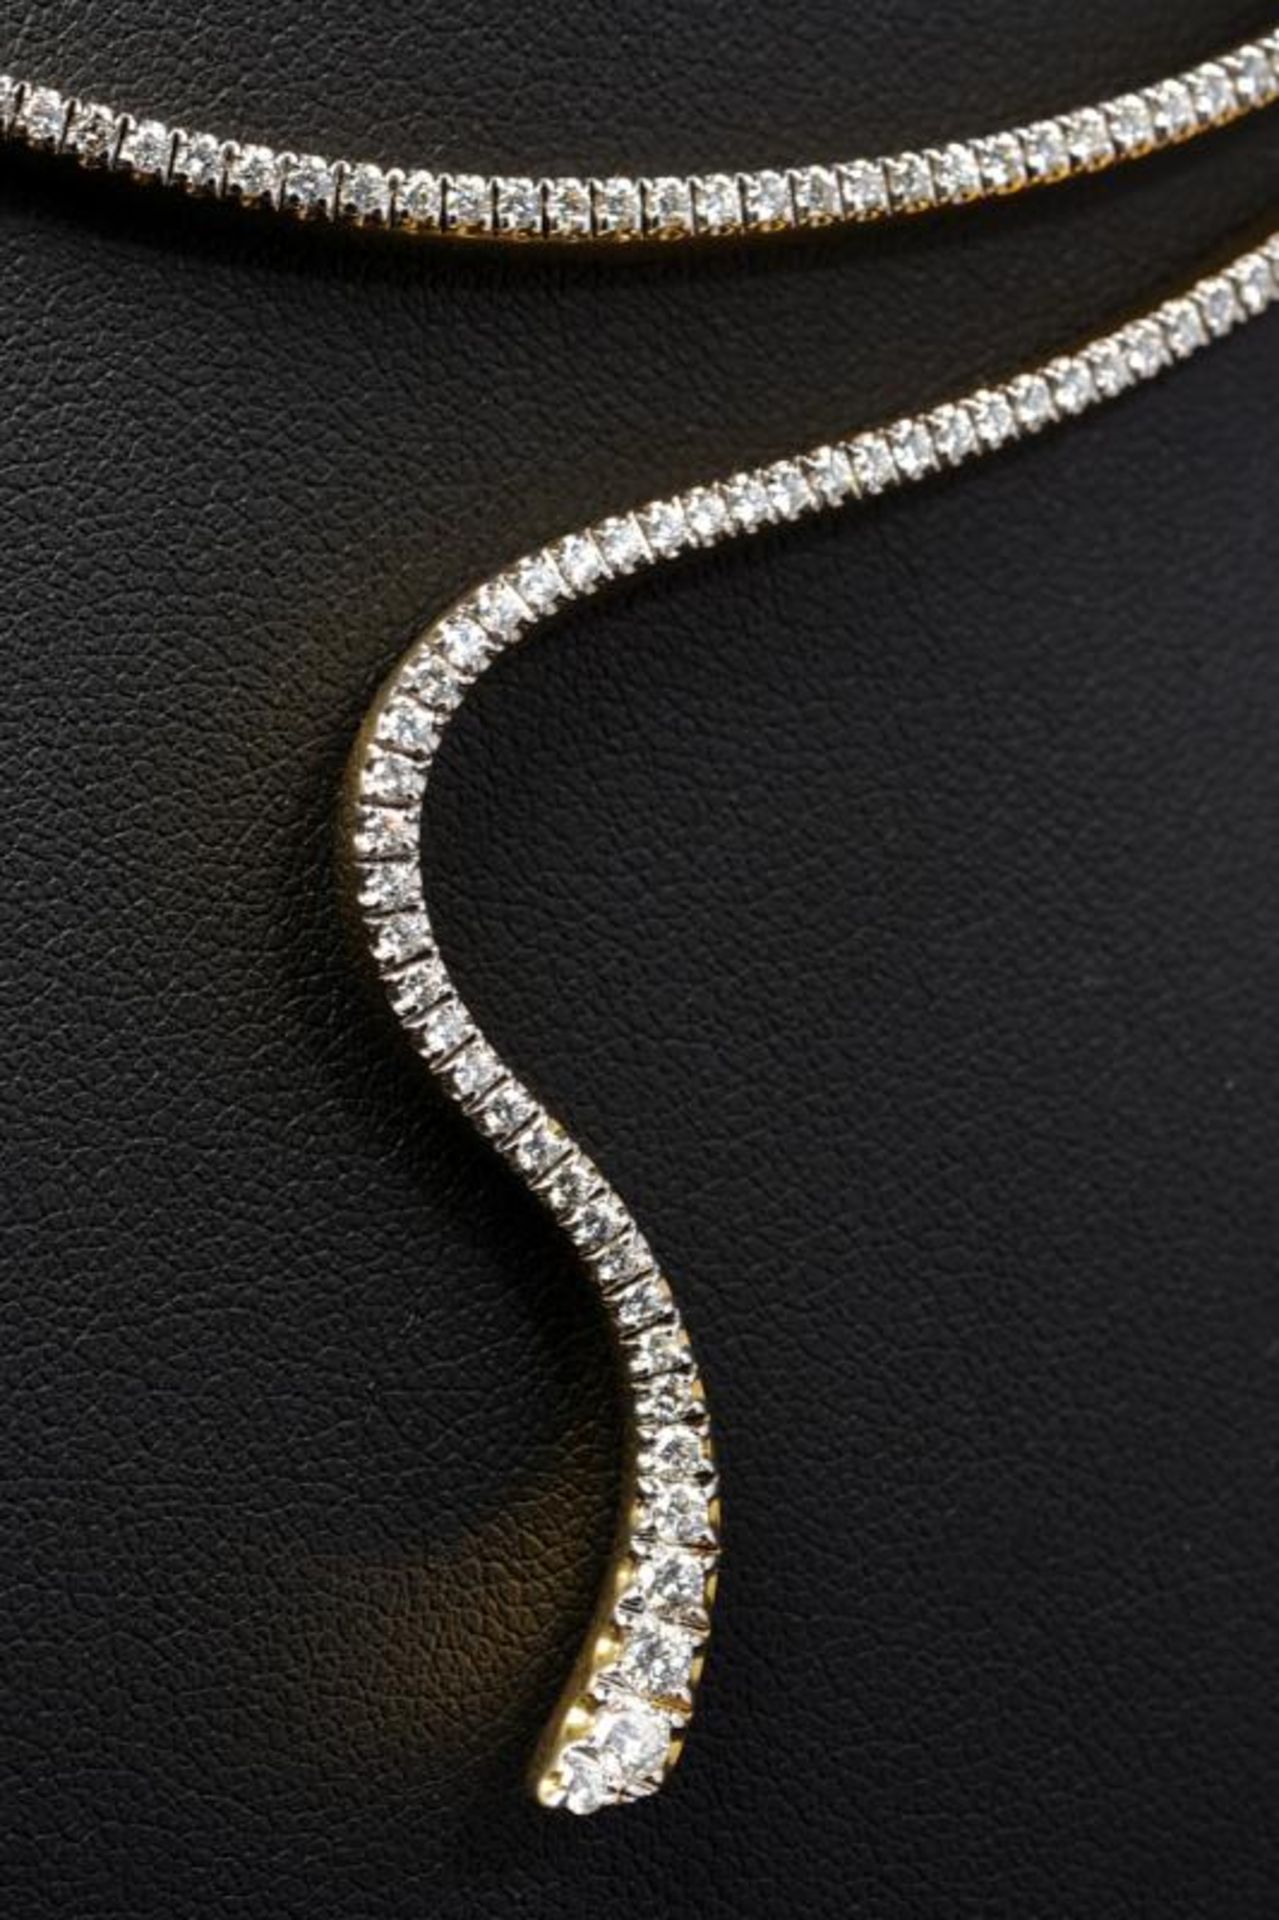 DAMIANI gold and diamonds EDEN necklace - Image 2 of 3